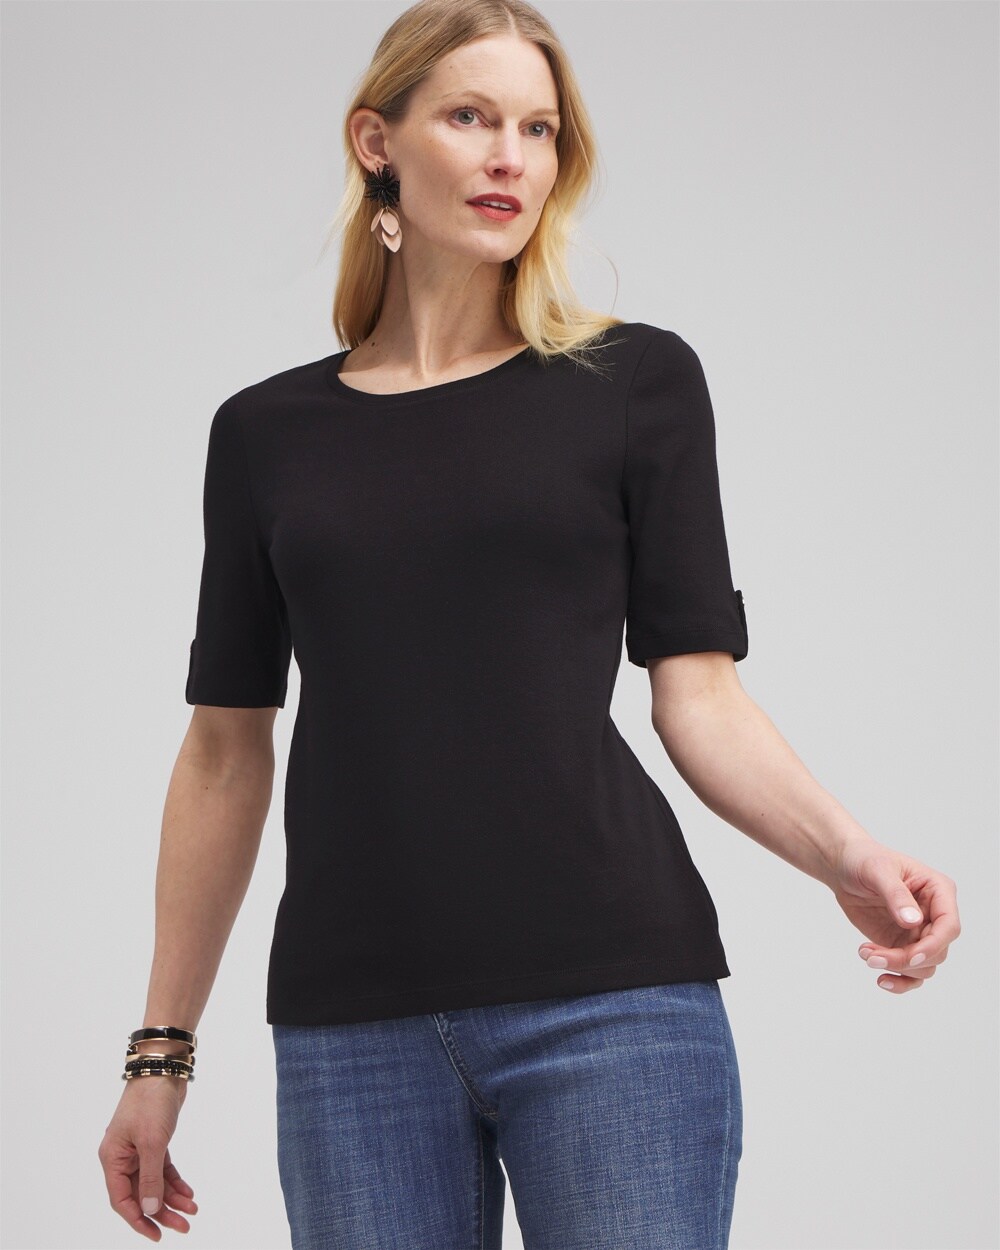 Chico's Elbow Sleeve Cotton Tee In Black Size 8/10 |